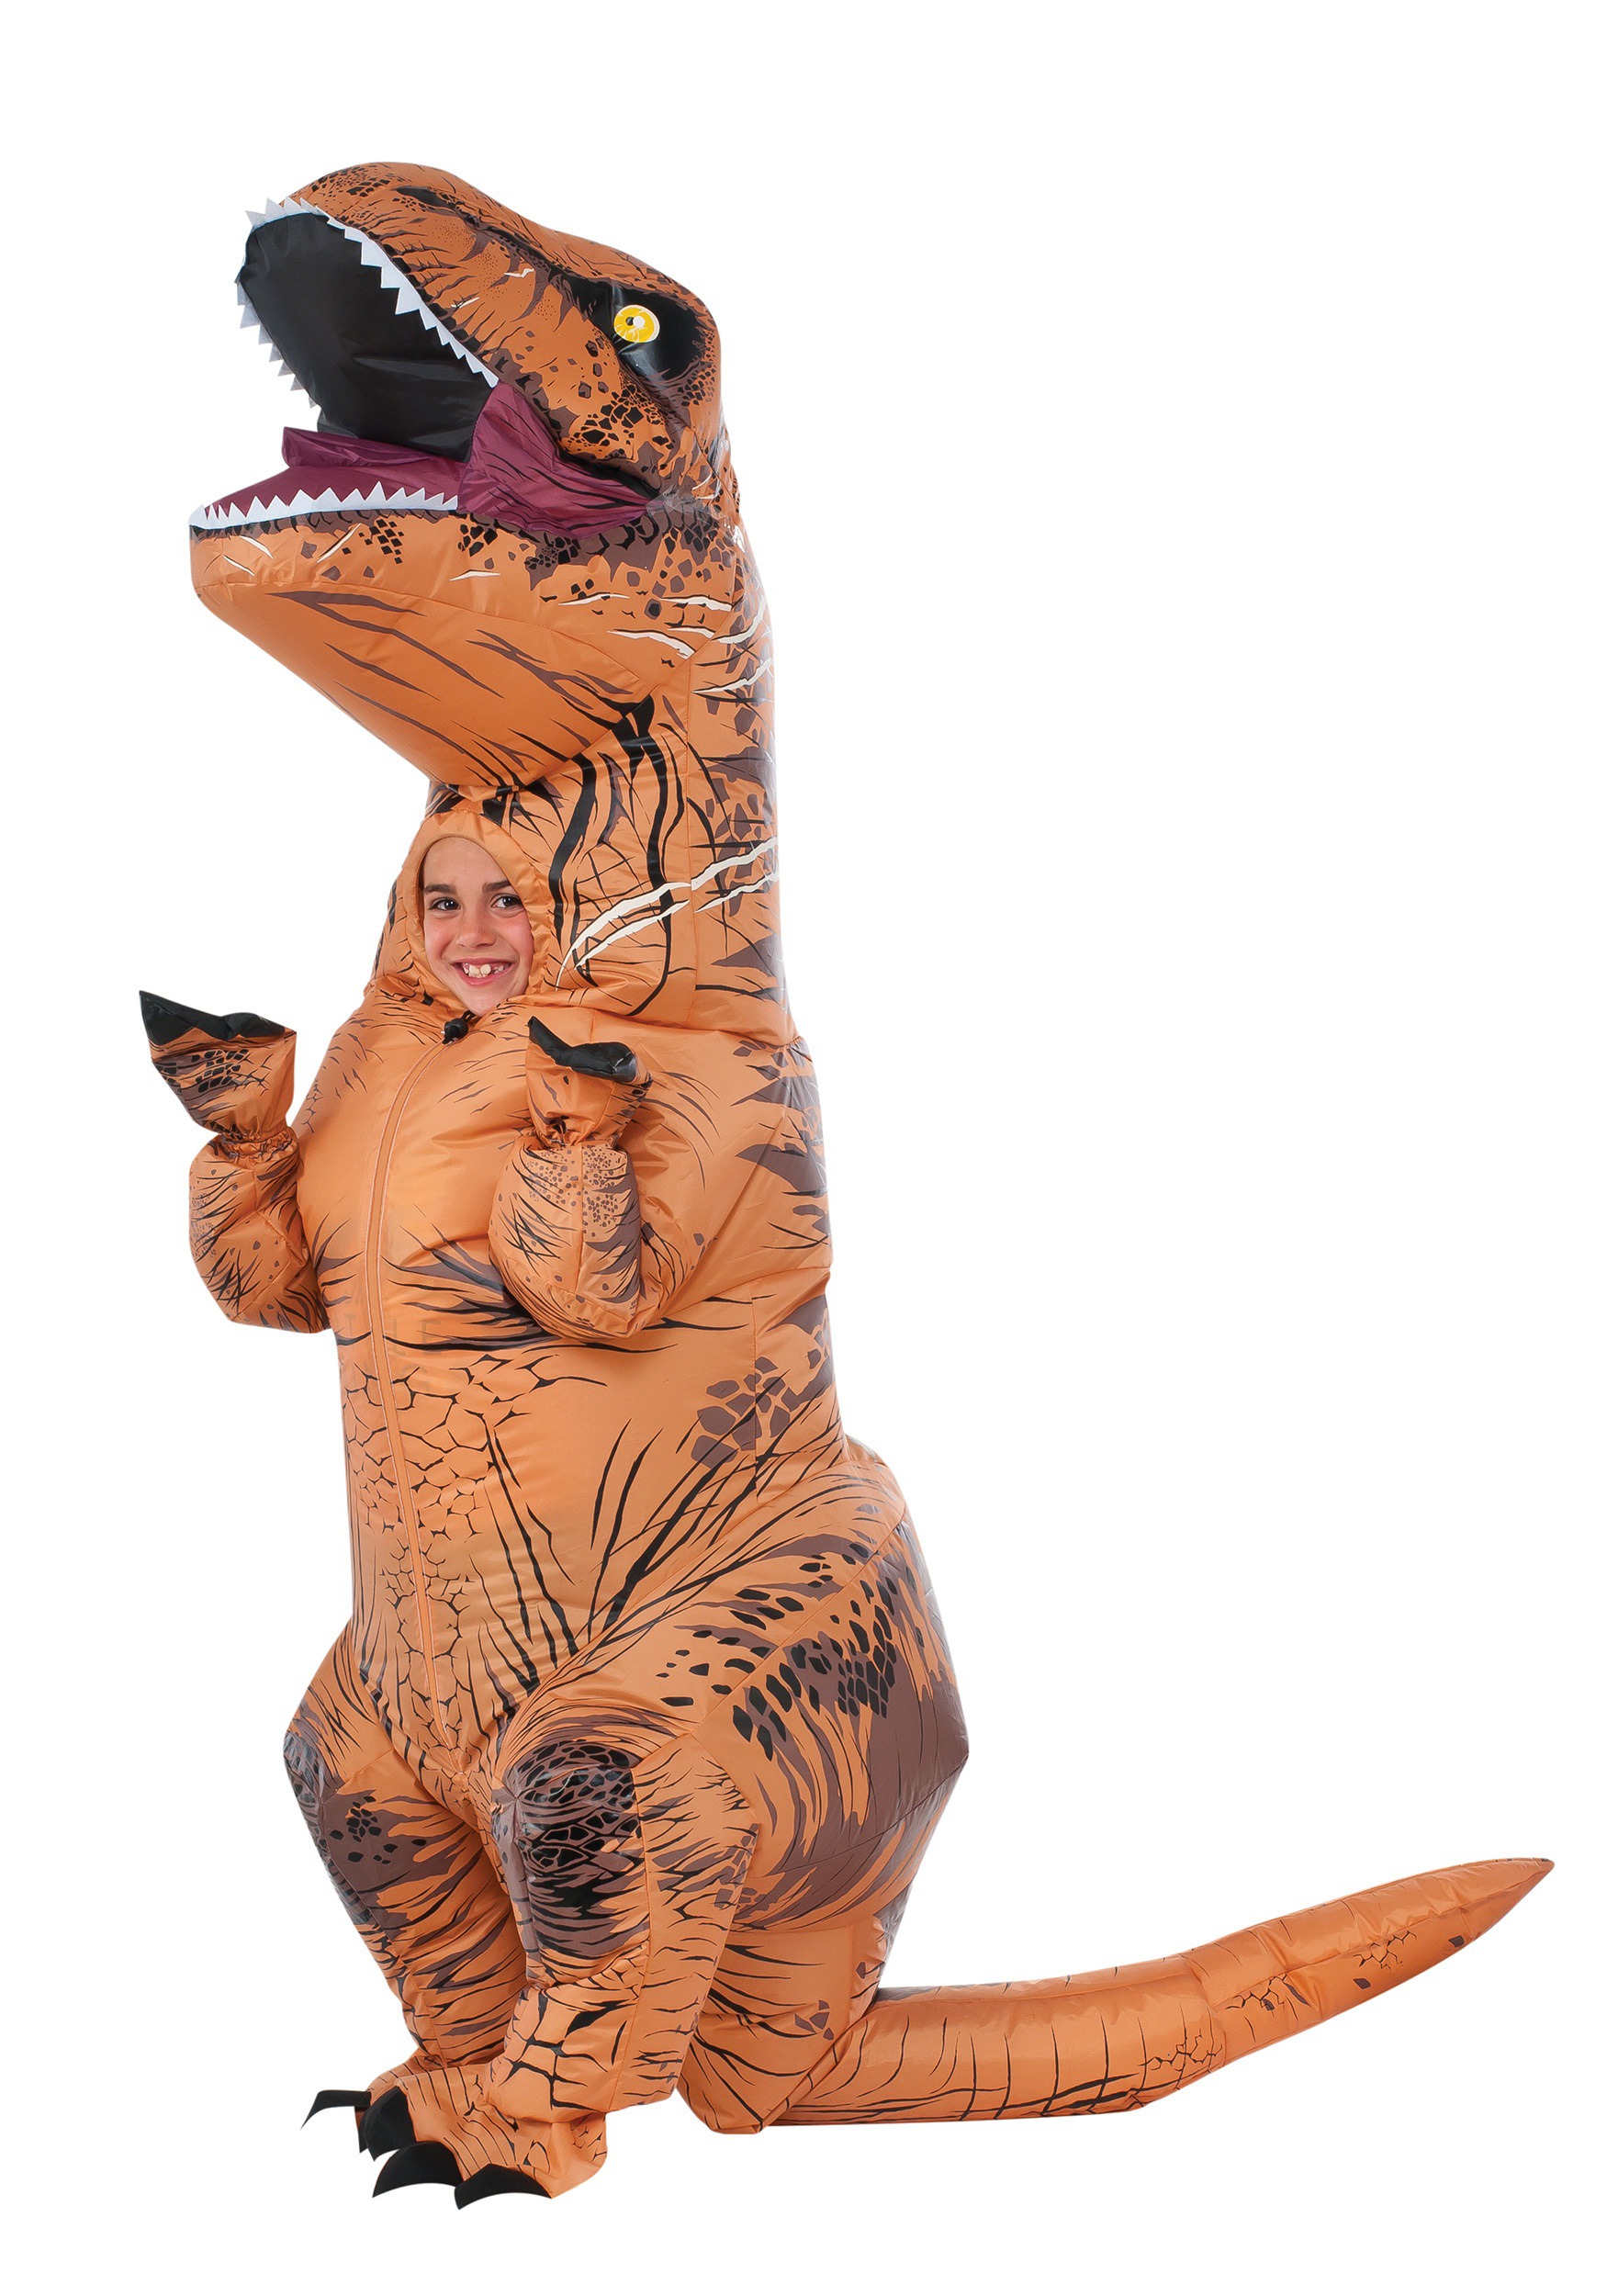 https://images.fun.com/products/29331/1-1/kids-inflatable-t-rex-costume.jpg